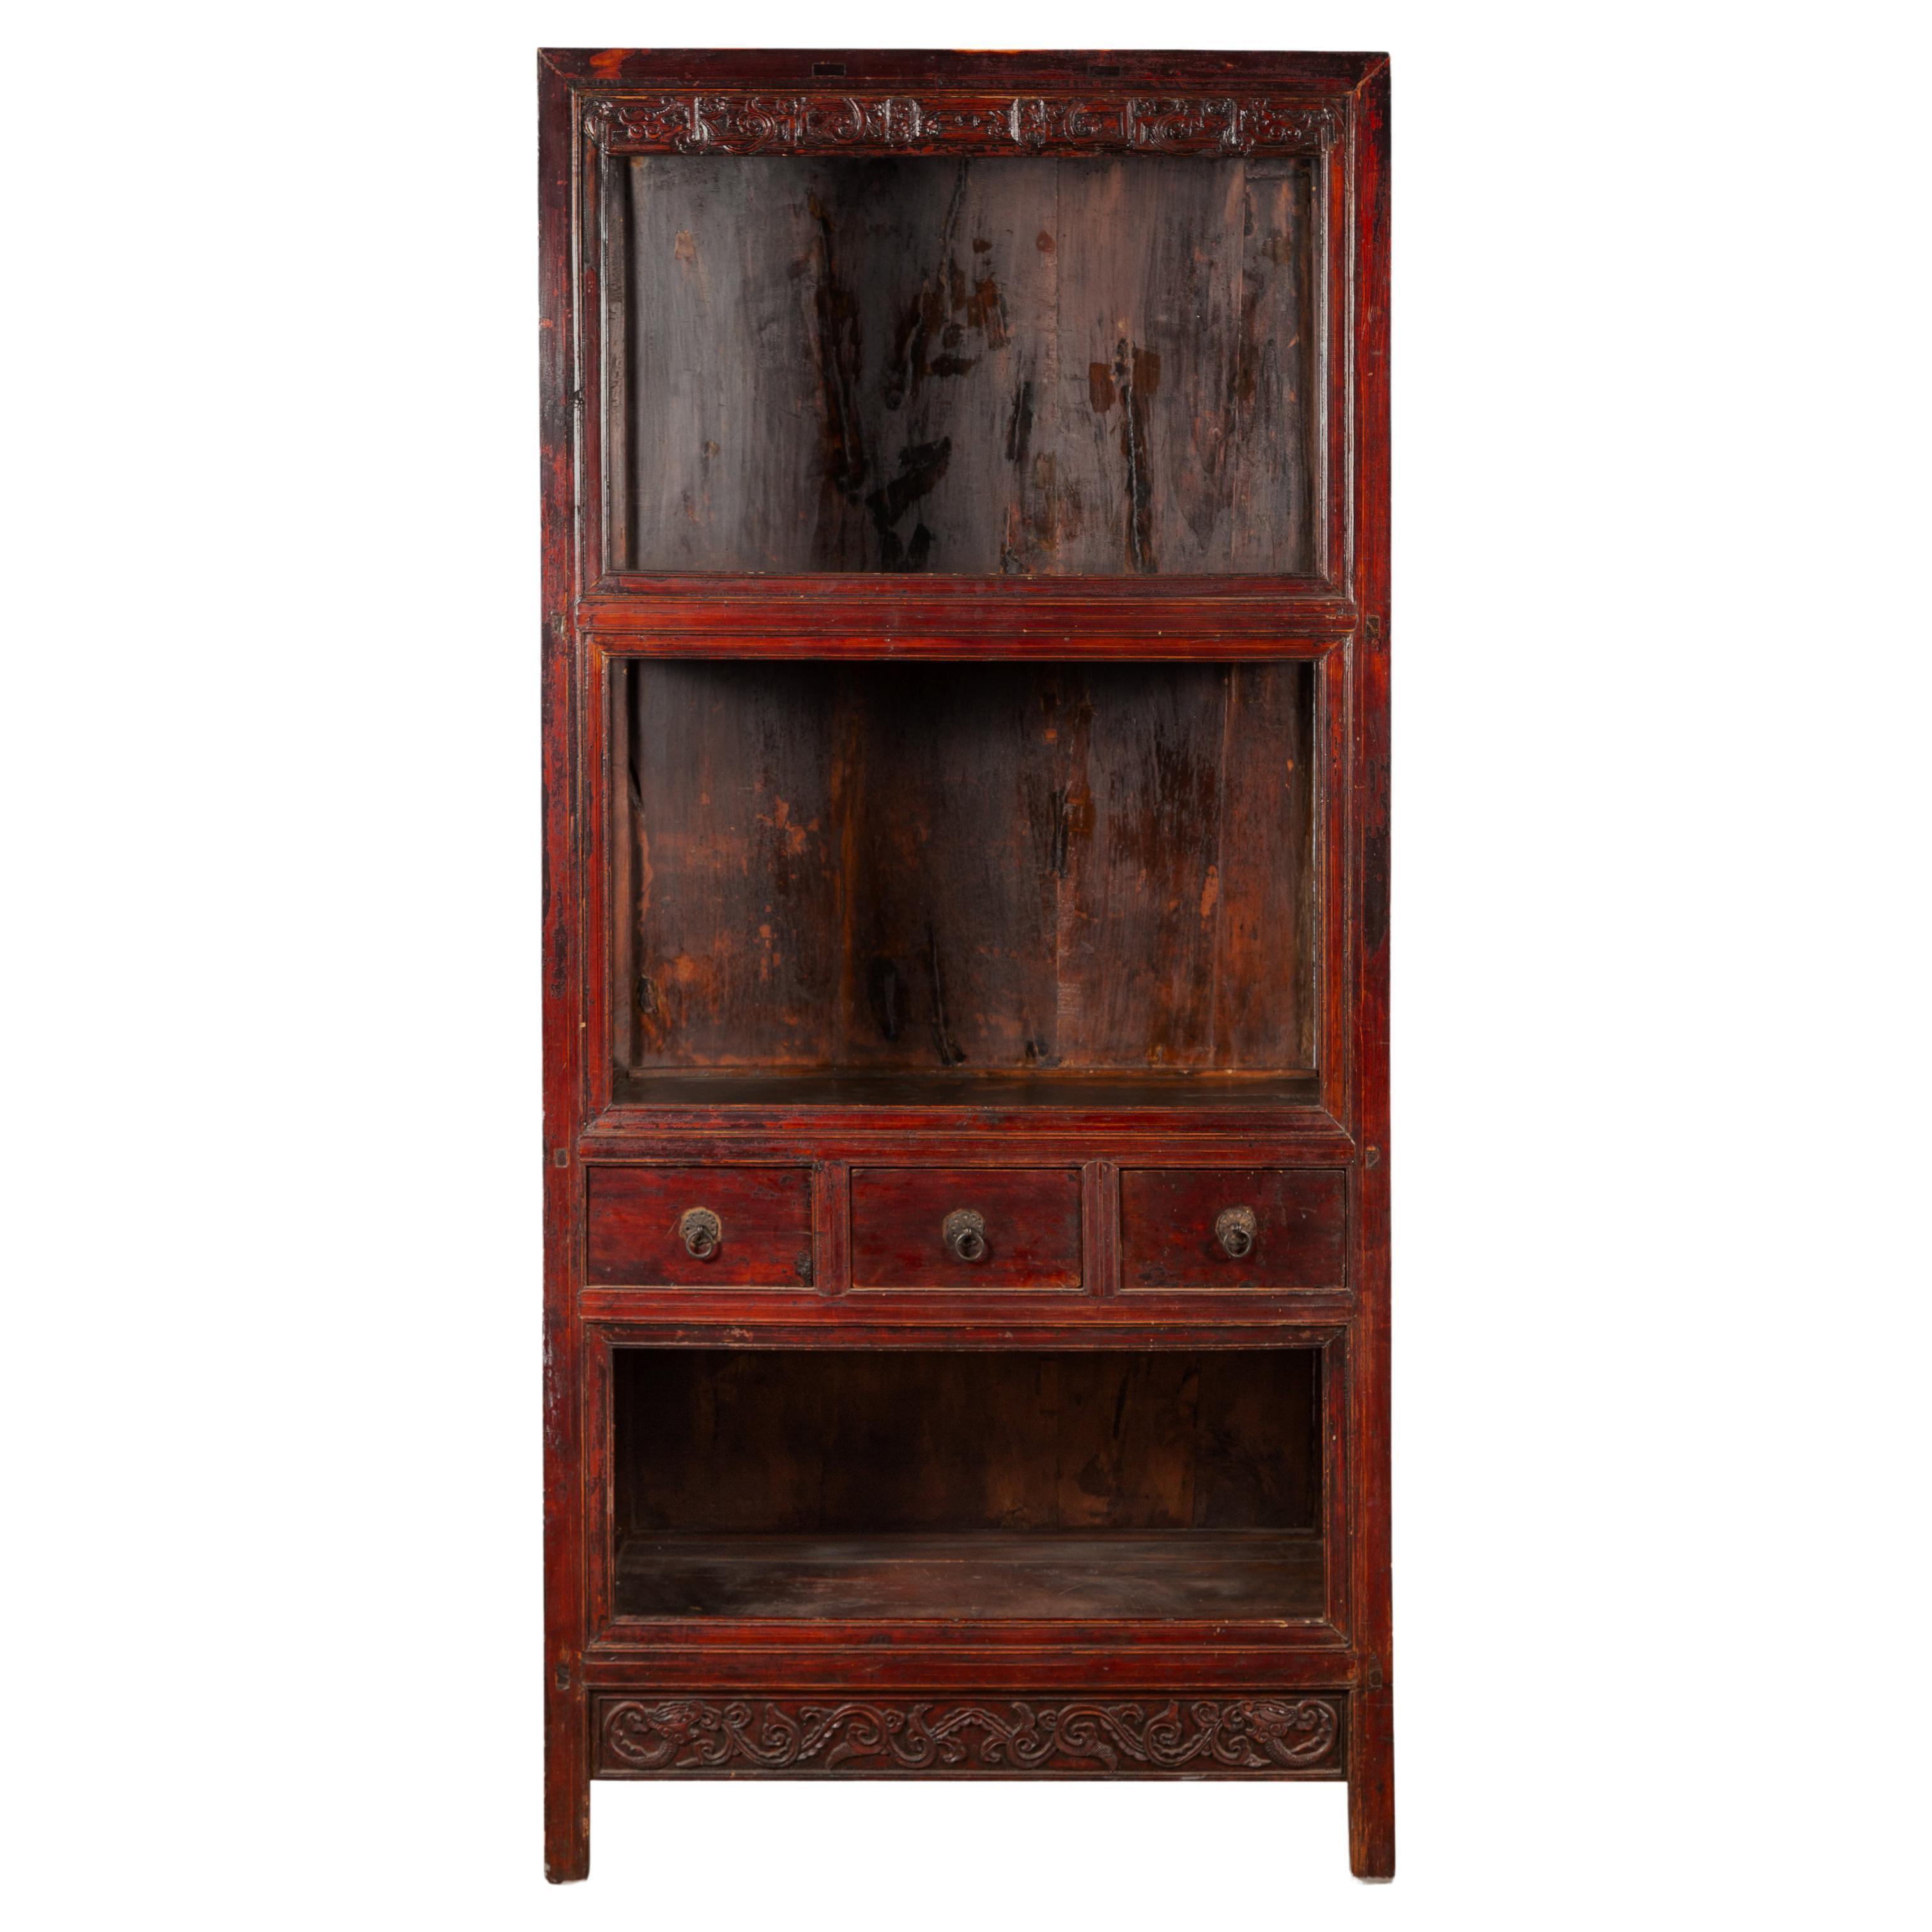 Chinese Qing Dynasty 19th Century Lacquered Cabinet with Carved Dragon Motifs For Sale